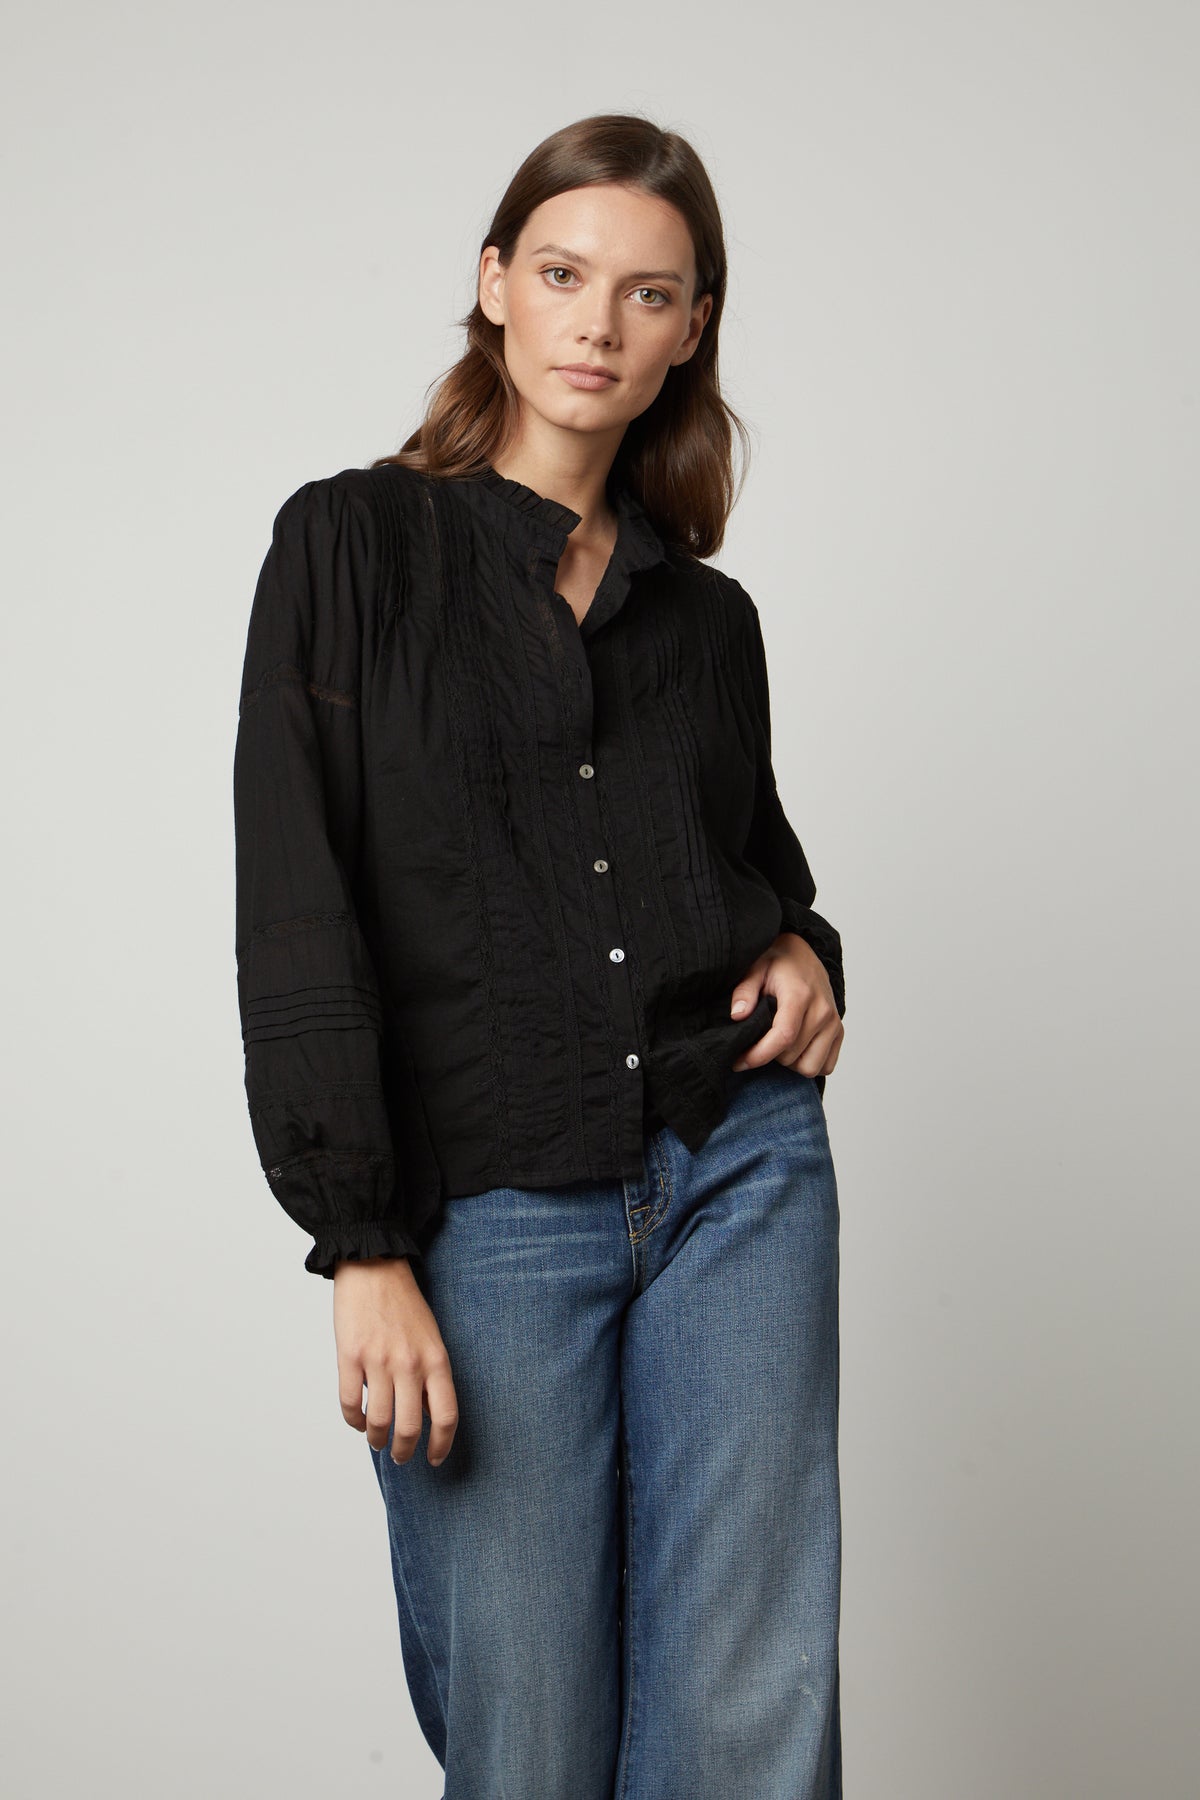 The model is wearing a ROMY LACE BOHO TOP blouse and jeans. (Brand: Velvet by Graham & Spencer)-26834995642561